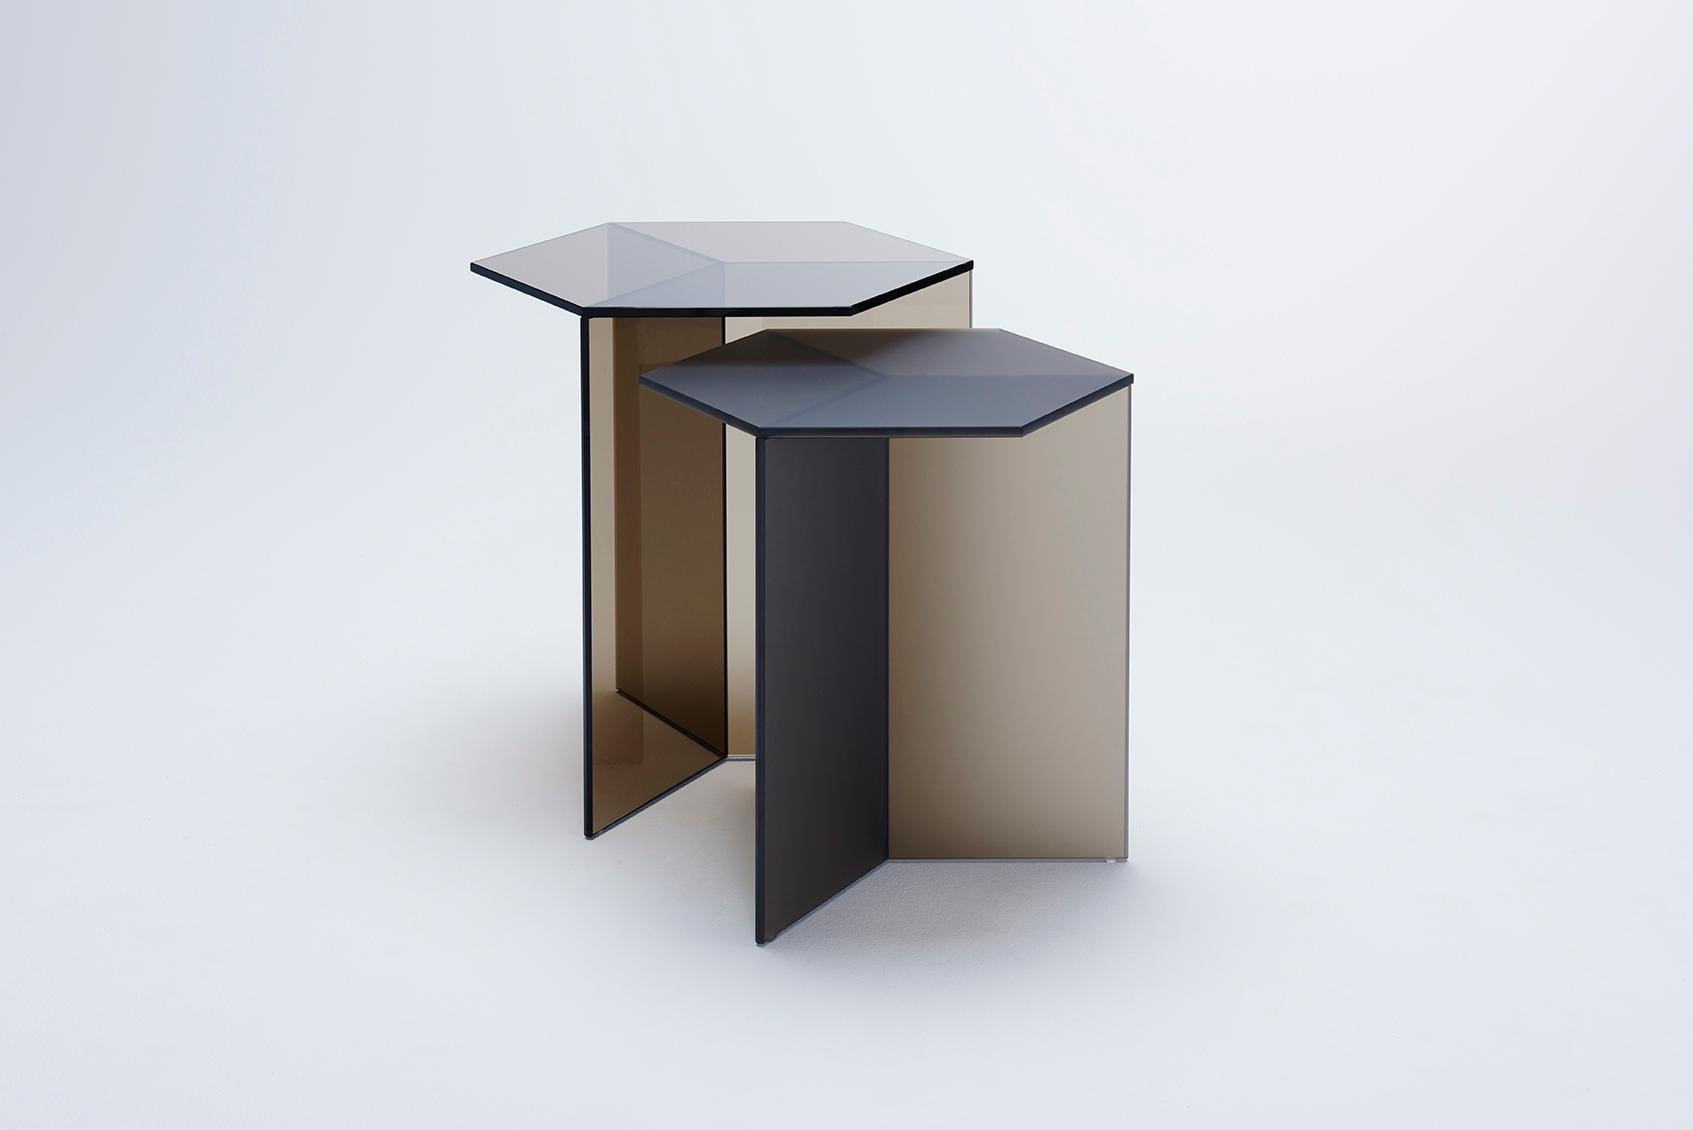 The Isom side tables create intriguing optical illusions, conjuring images of isometric cubes when viewed from certain angles. This effect is created through the CNC-processing of traditional plate glass combined with a millimetre-precise bonding